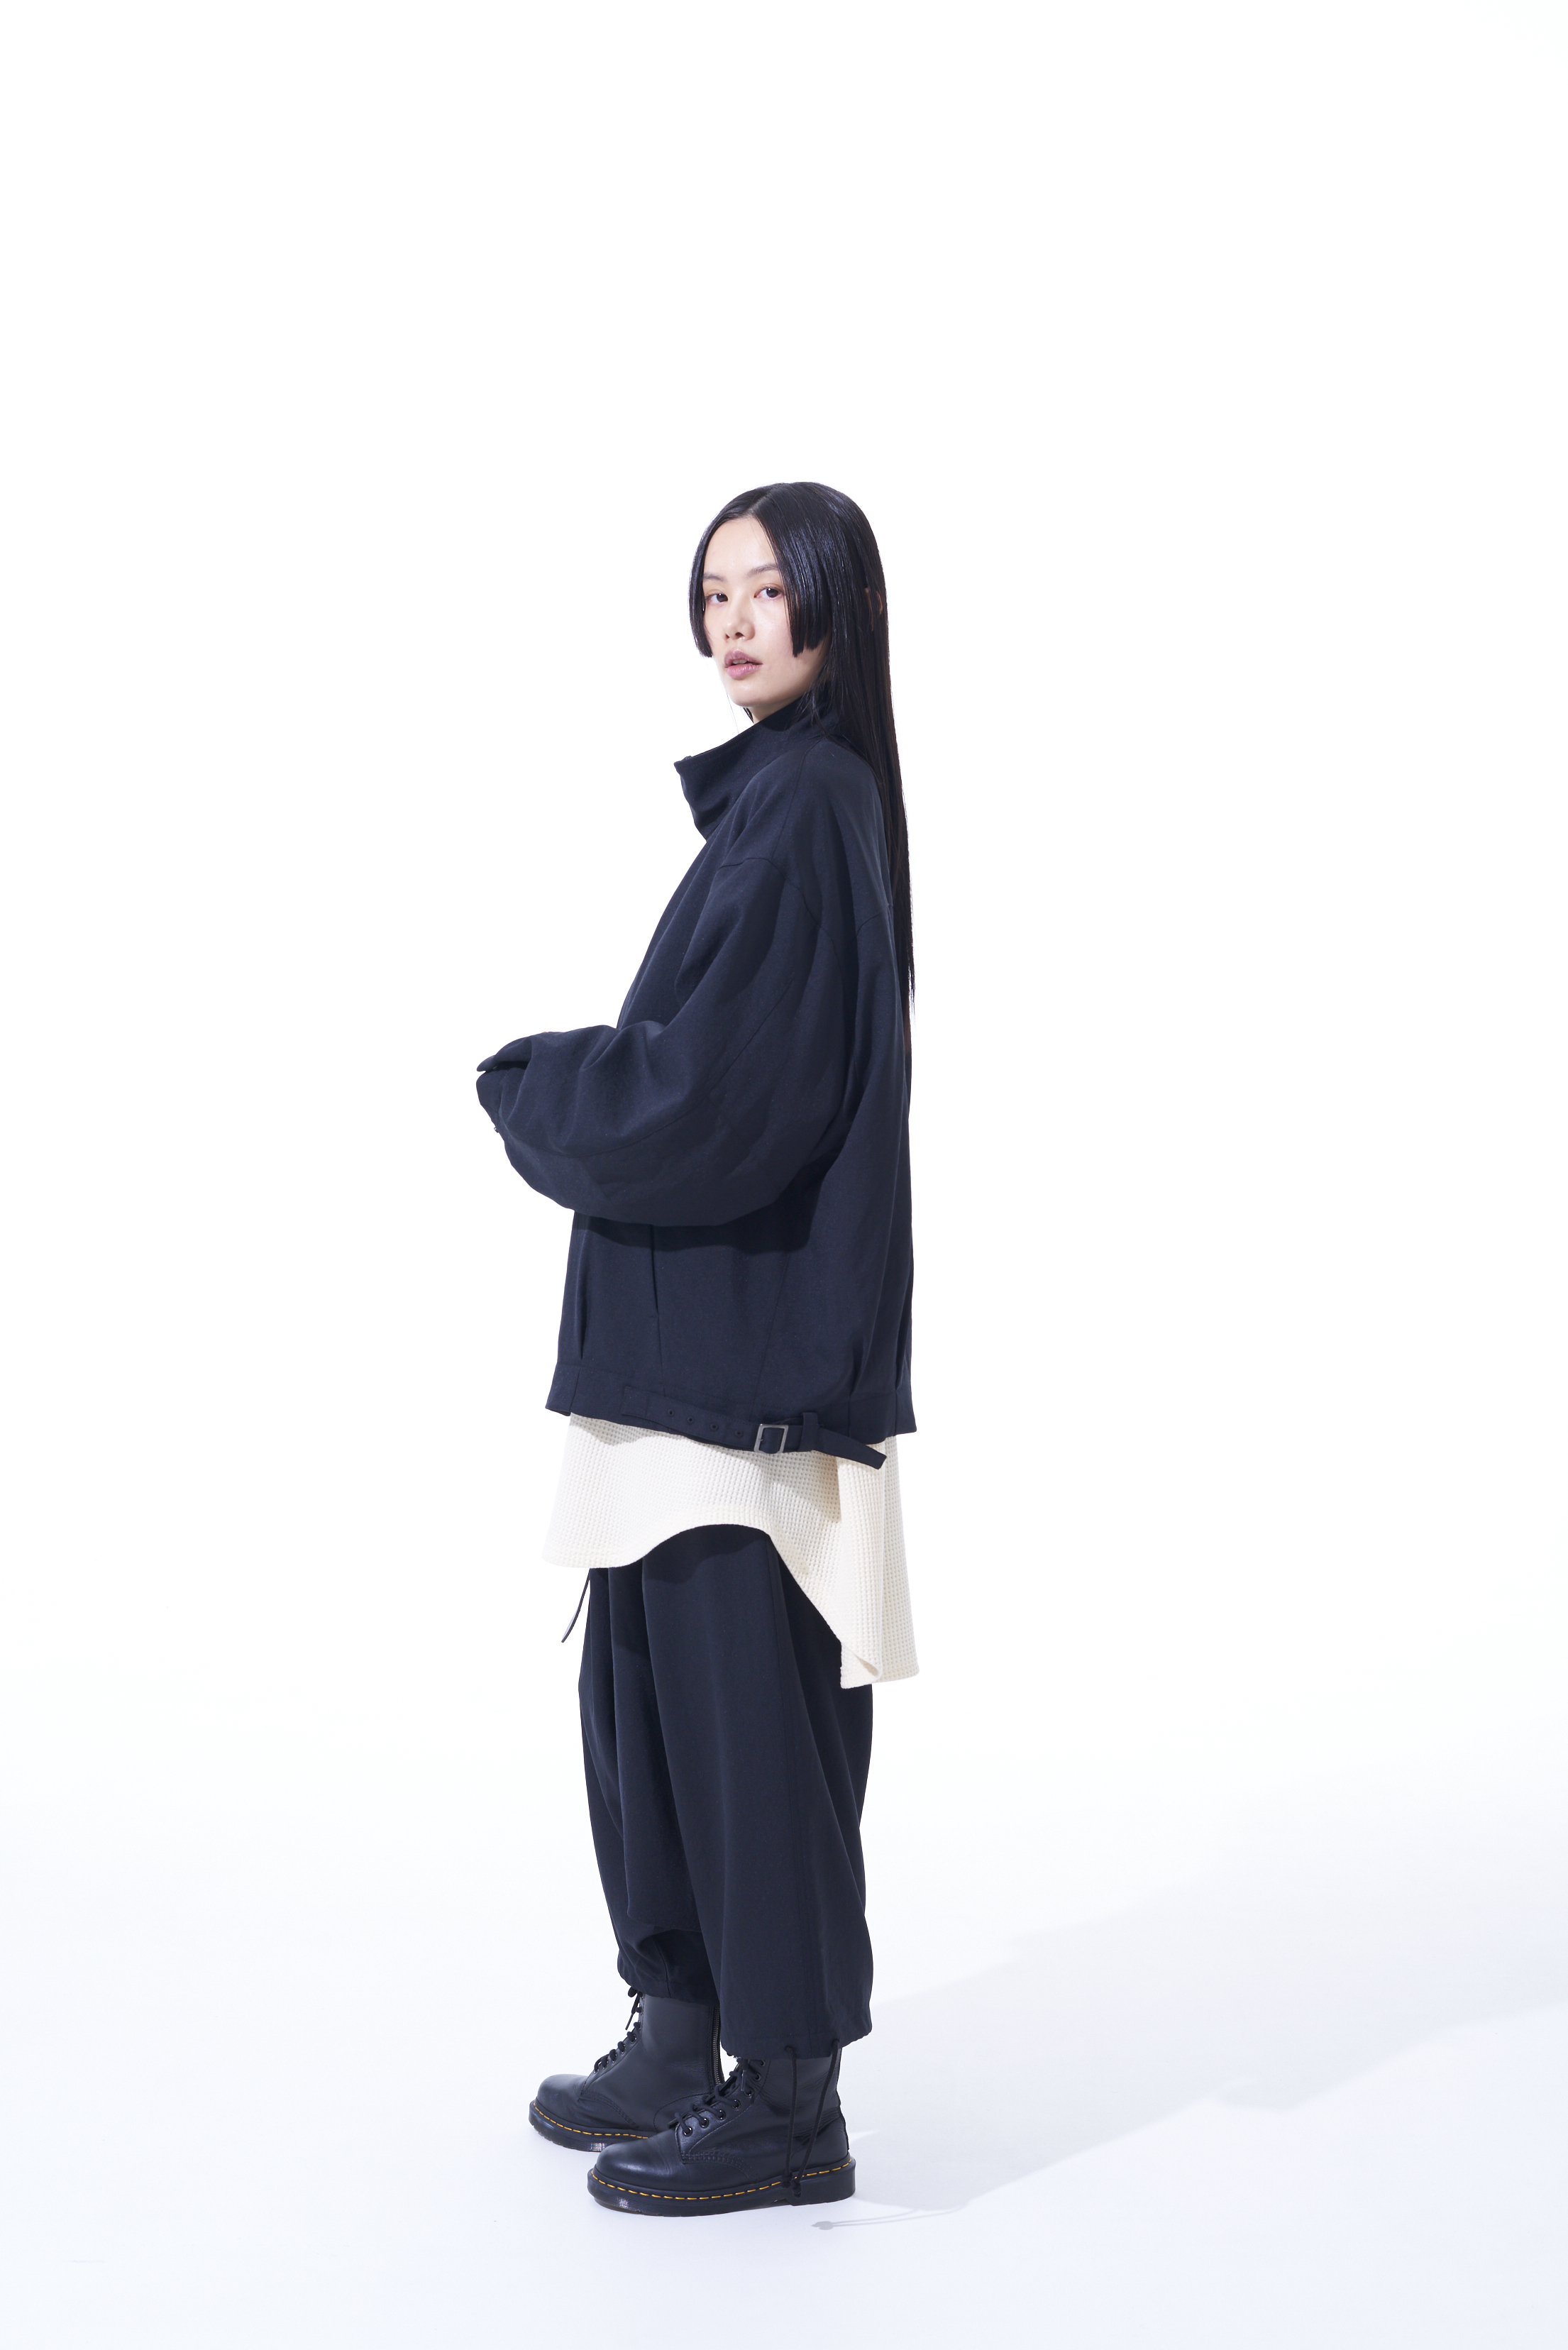 PE/STRETCH TWILL OVERSIZED STAND COLLAR BLOUSON WITH FUNCTIONAL LINING